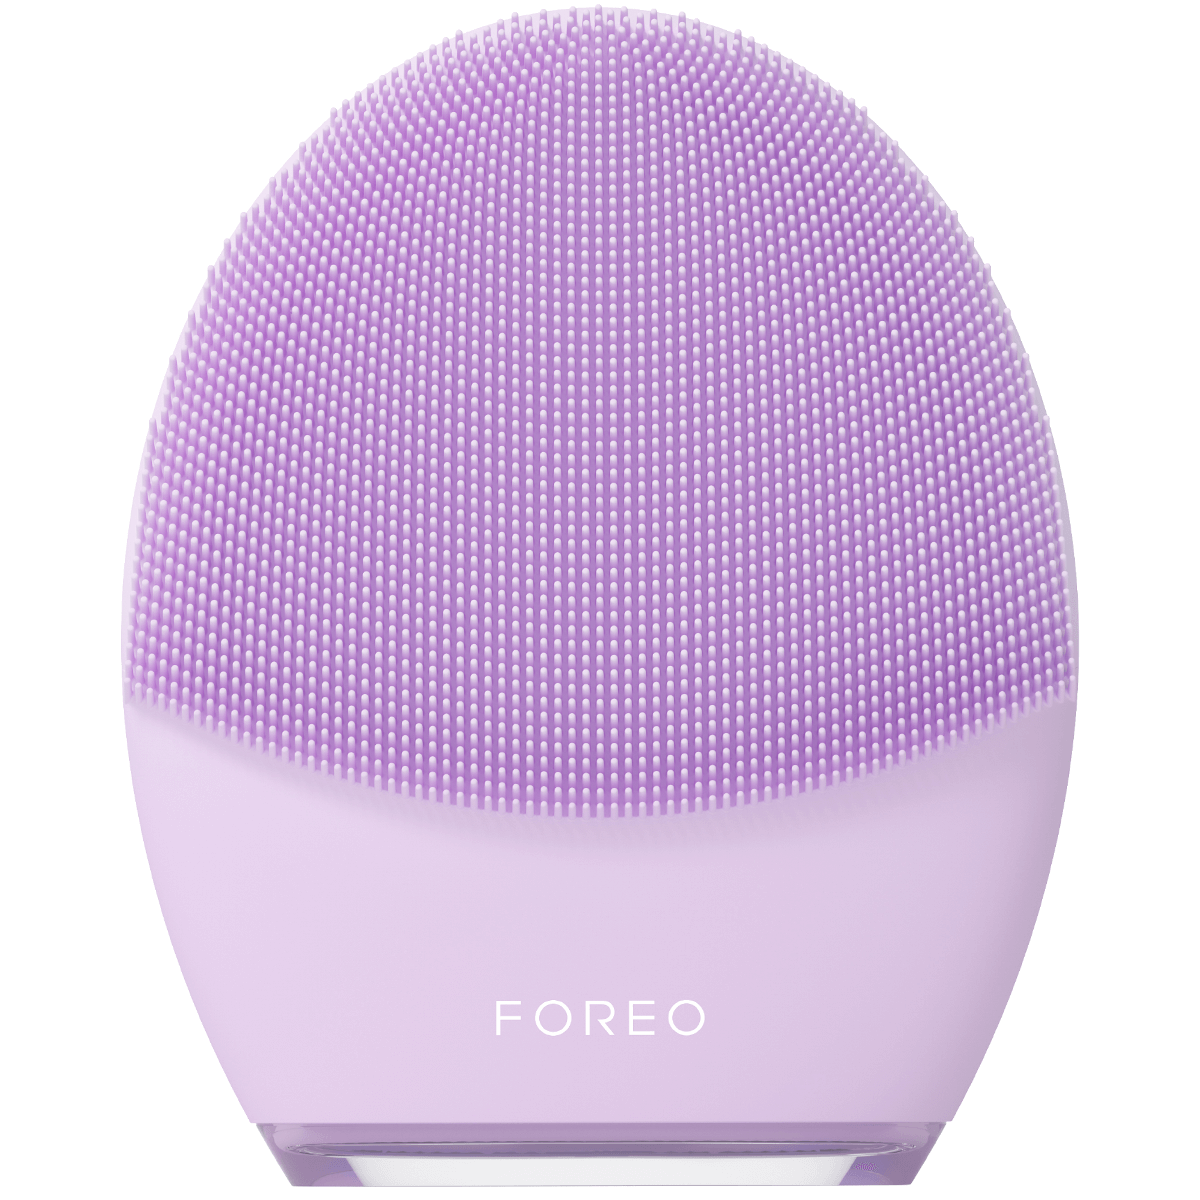 FOREO PEACH 2 Advanced IPL Hair Removal Device | CurrentBody US